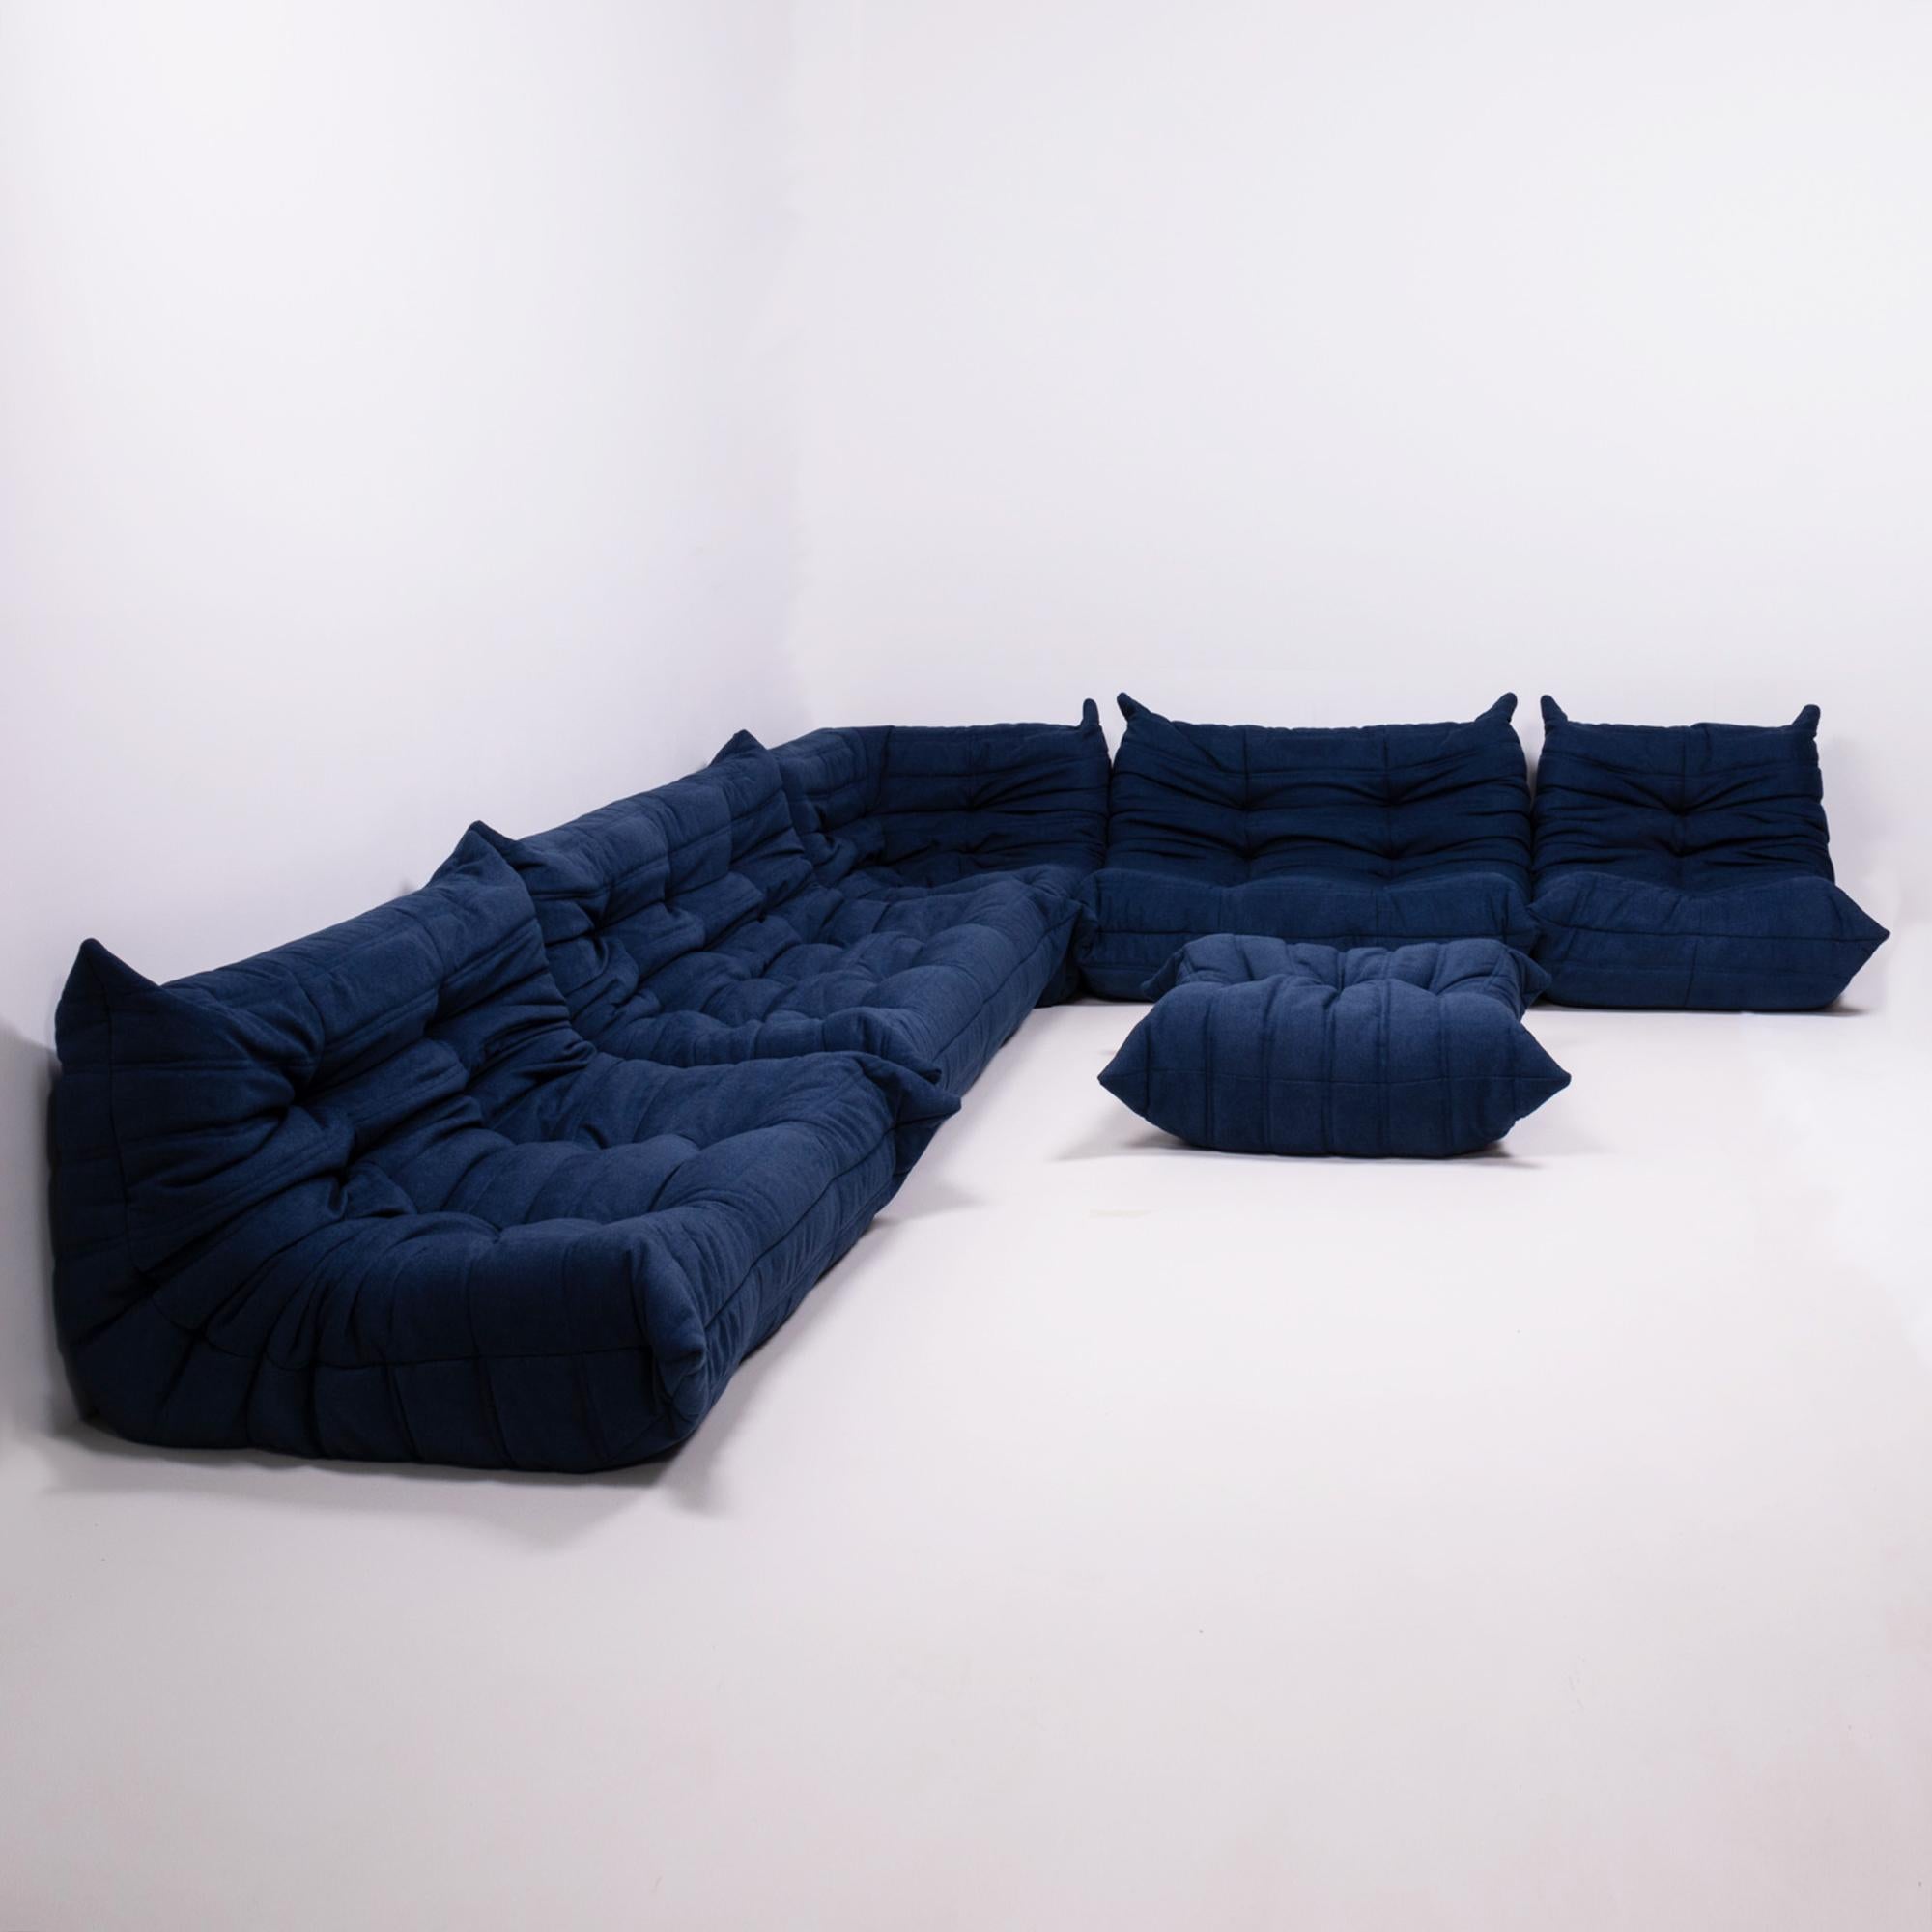 The iconic Togo sofa, originally designed by Michel Ducaroy for Ligne Roset in 1973 has become a design Classic.

This six piece modular set is incredibly versatile and can be configured into one large corner sofa or split for a multitude of